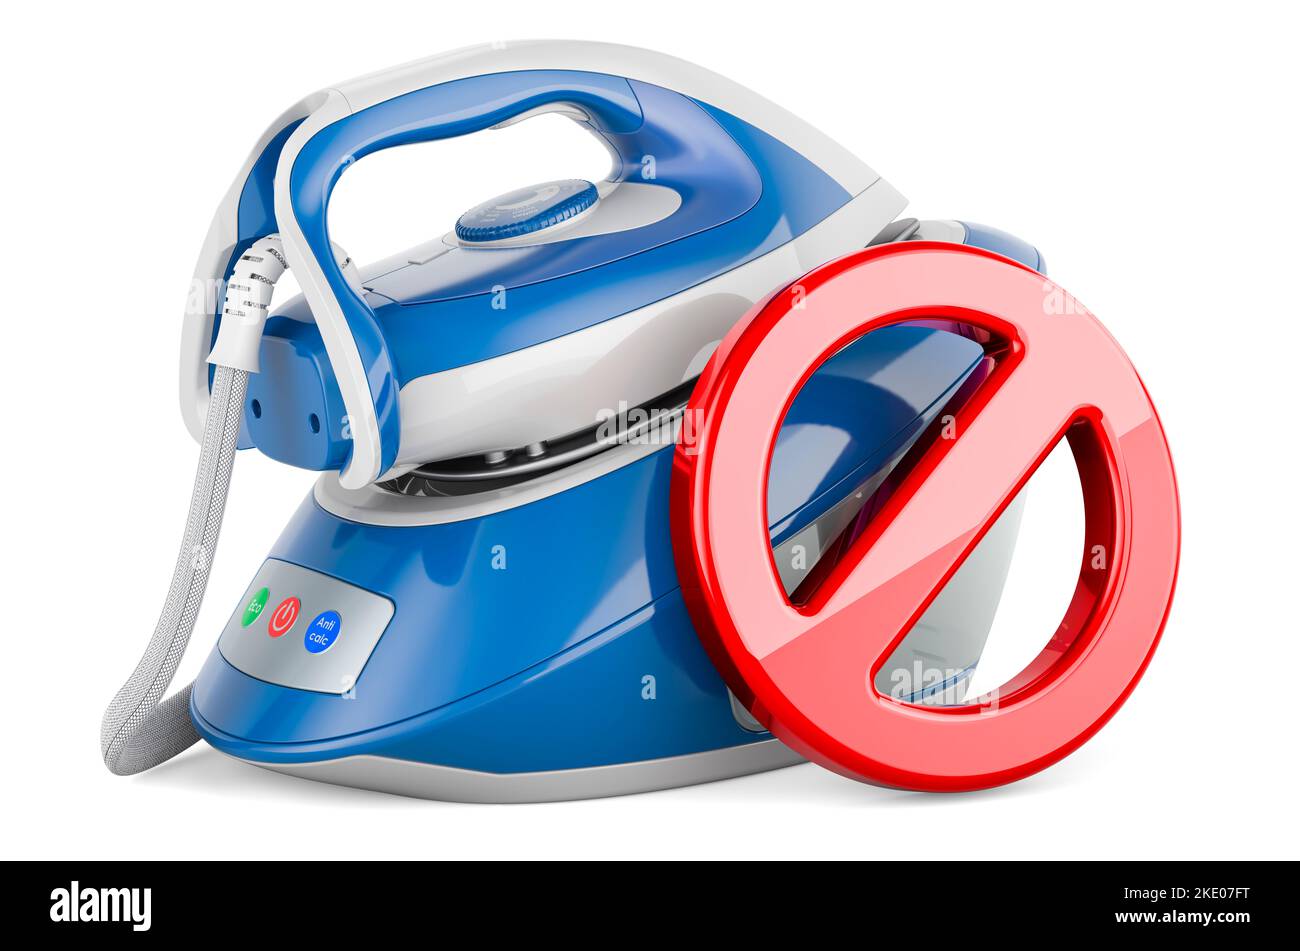 Steam generator iron with prohibition sign, 3D rendering isolated on white background Stock Photo